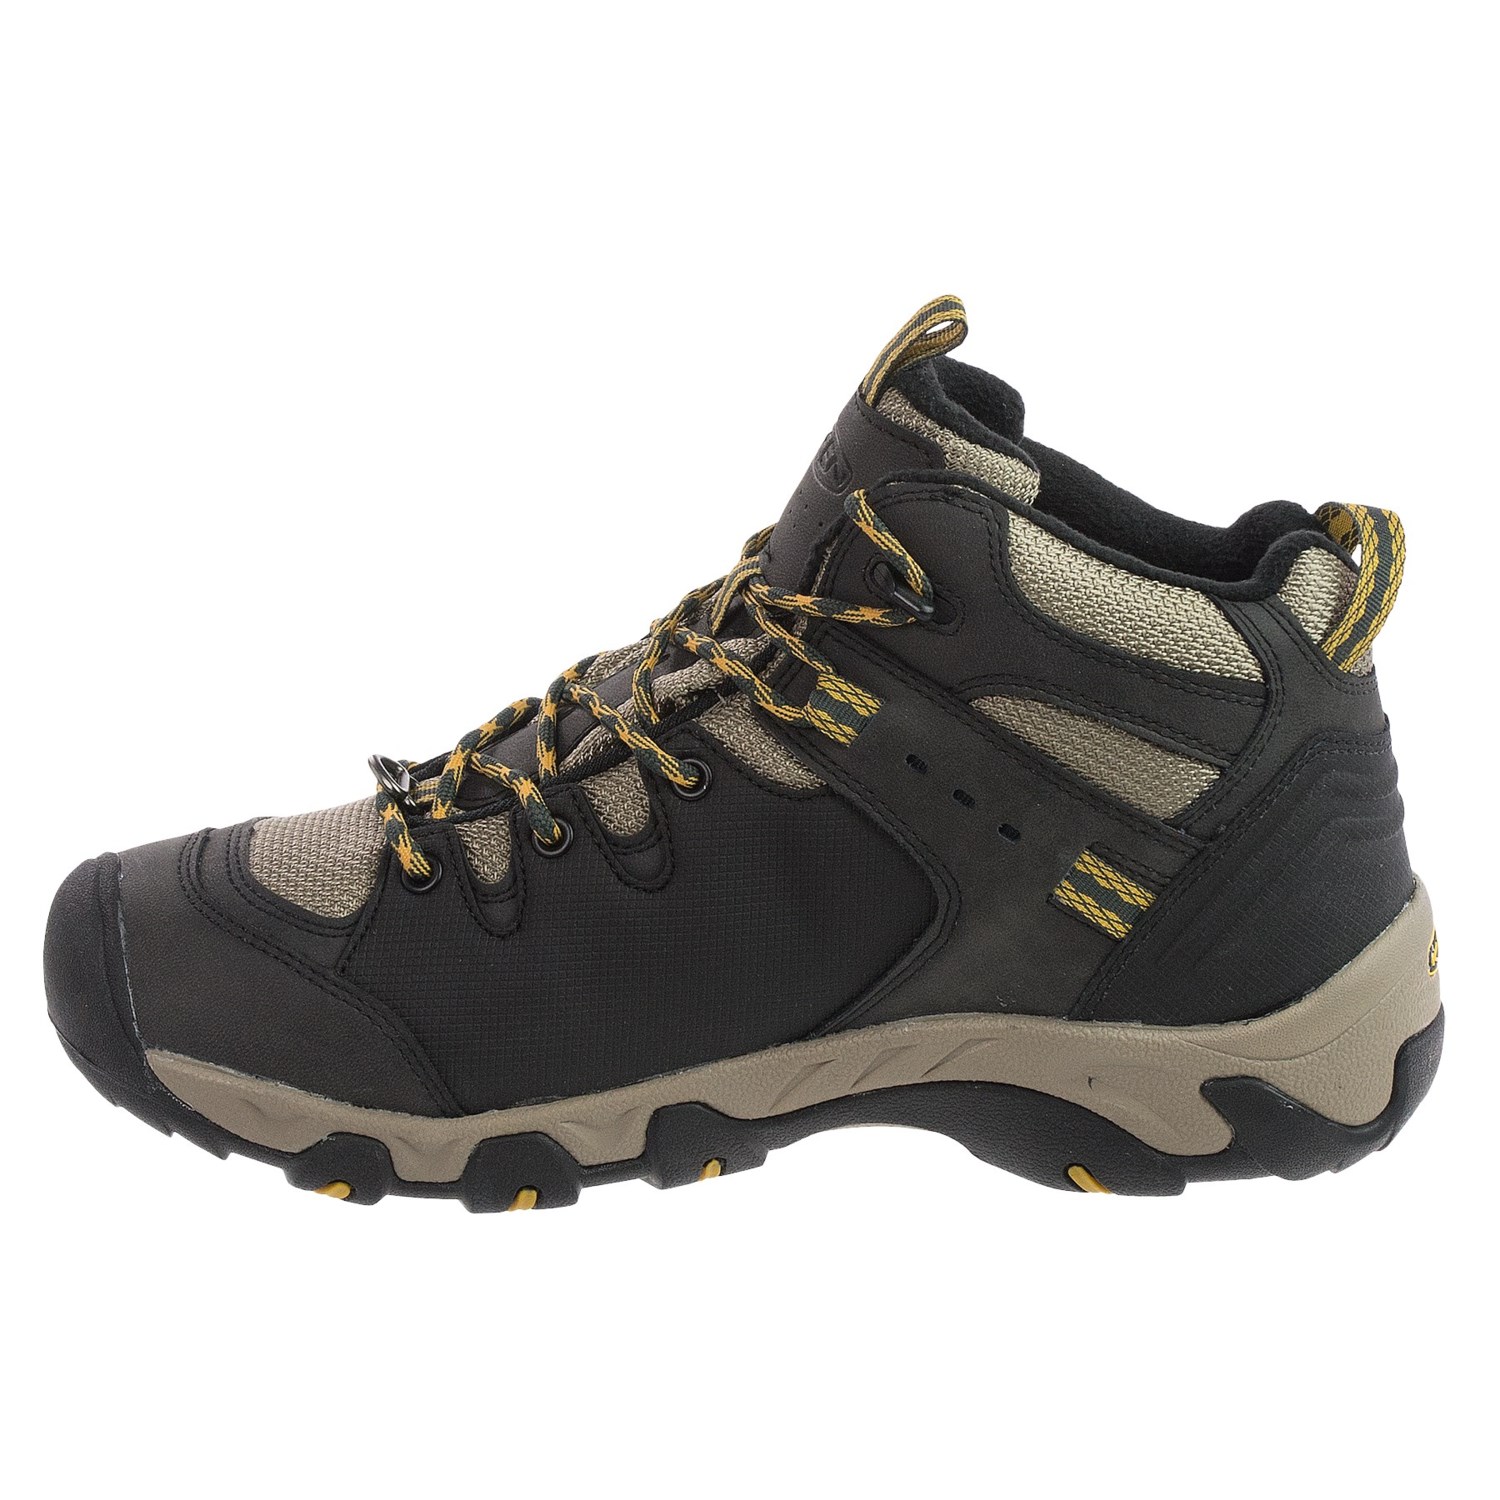 Keen Koven Polar Winter Shoes (For Men) 107WC - Save 38%